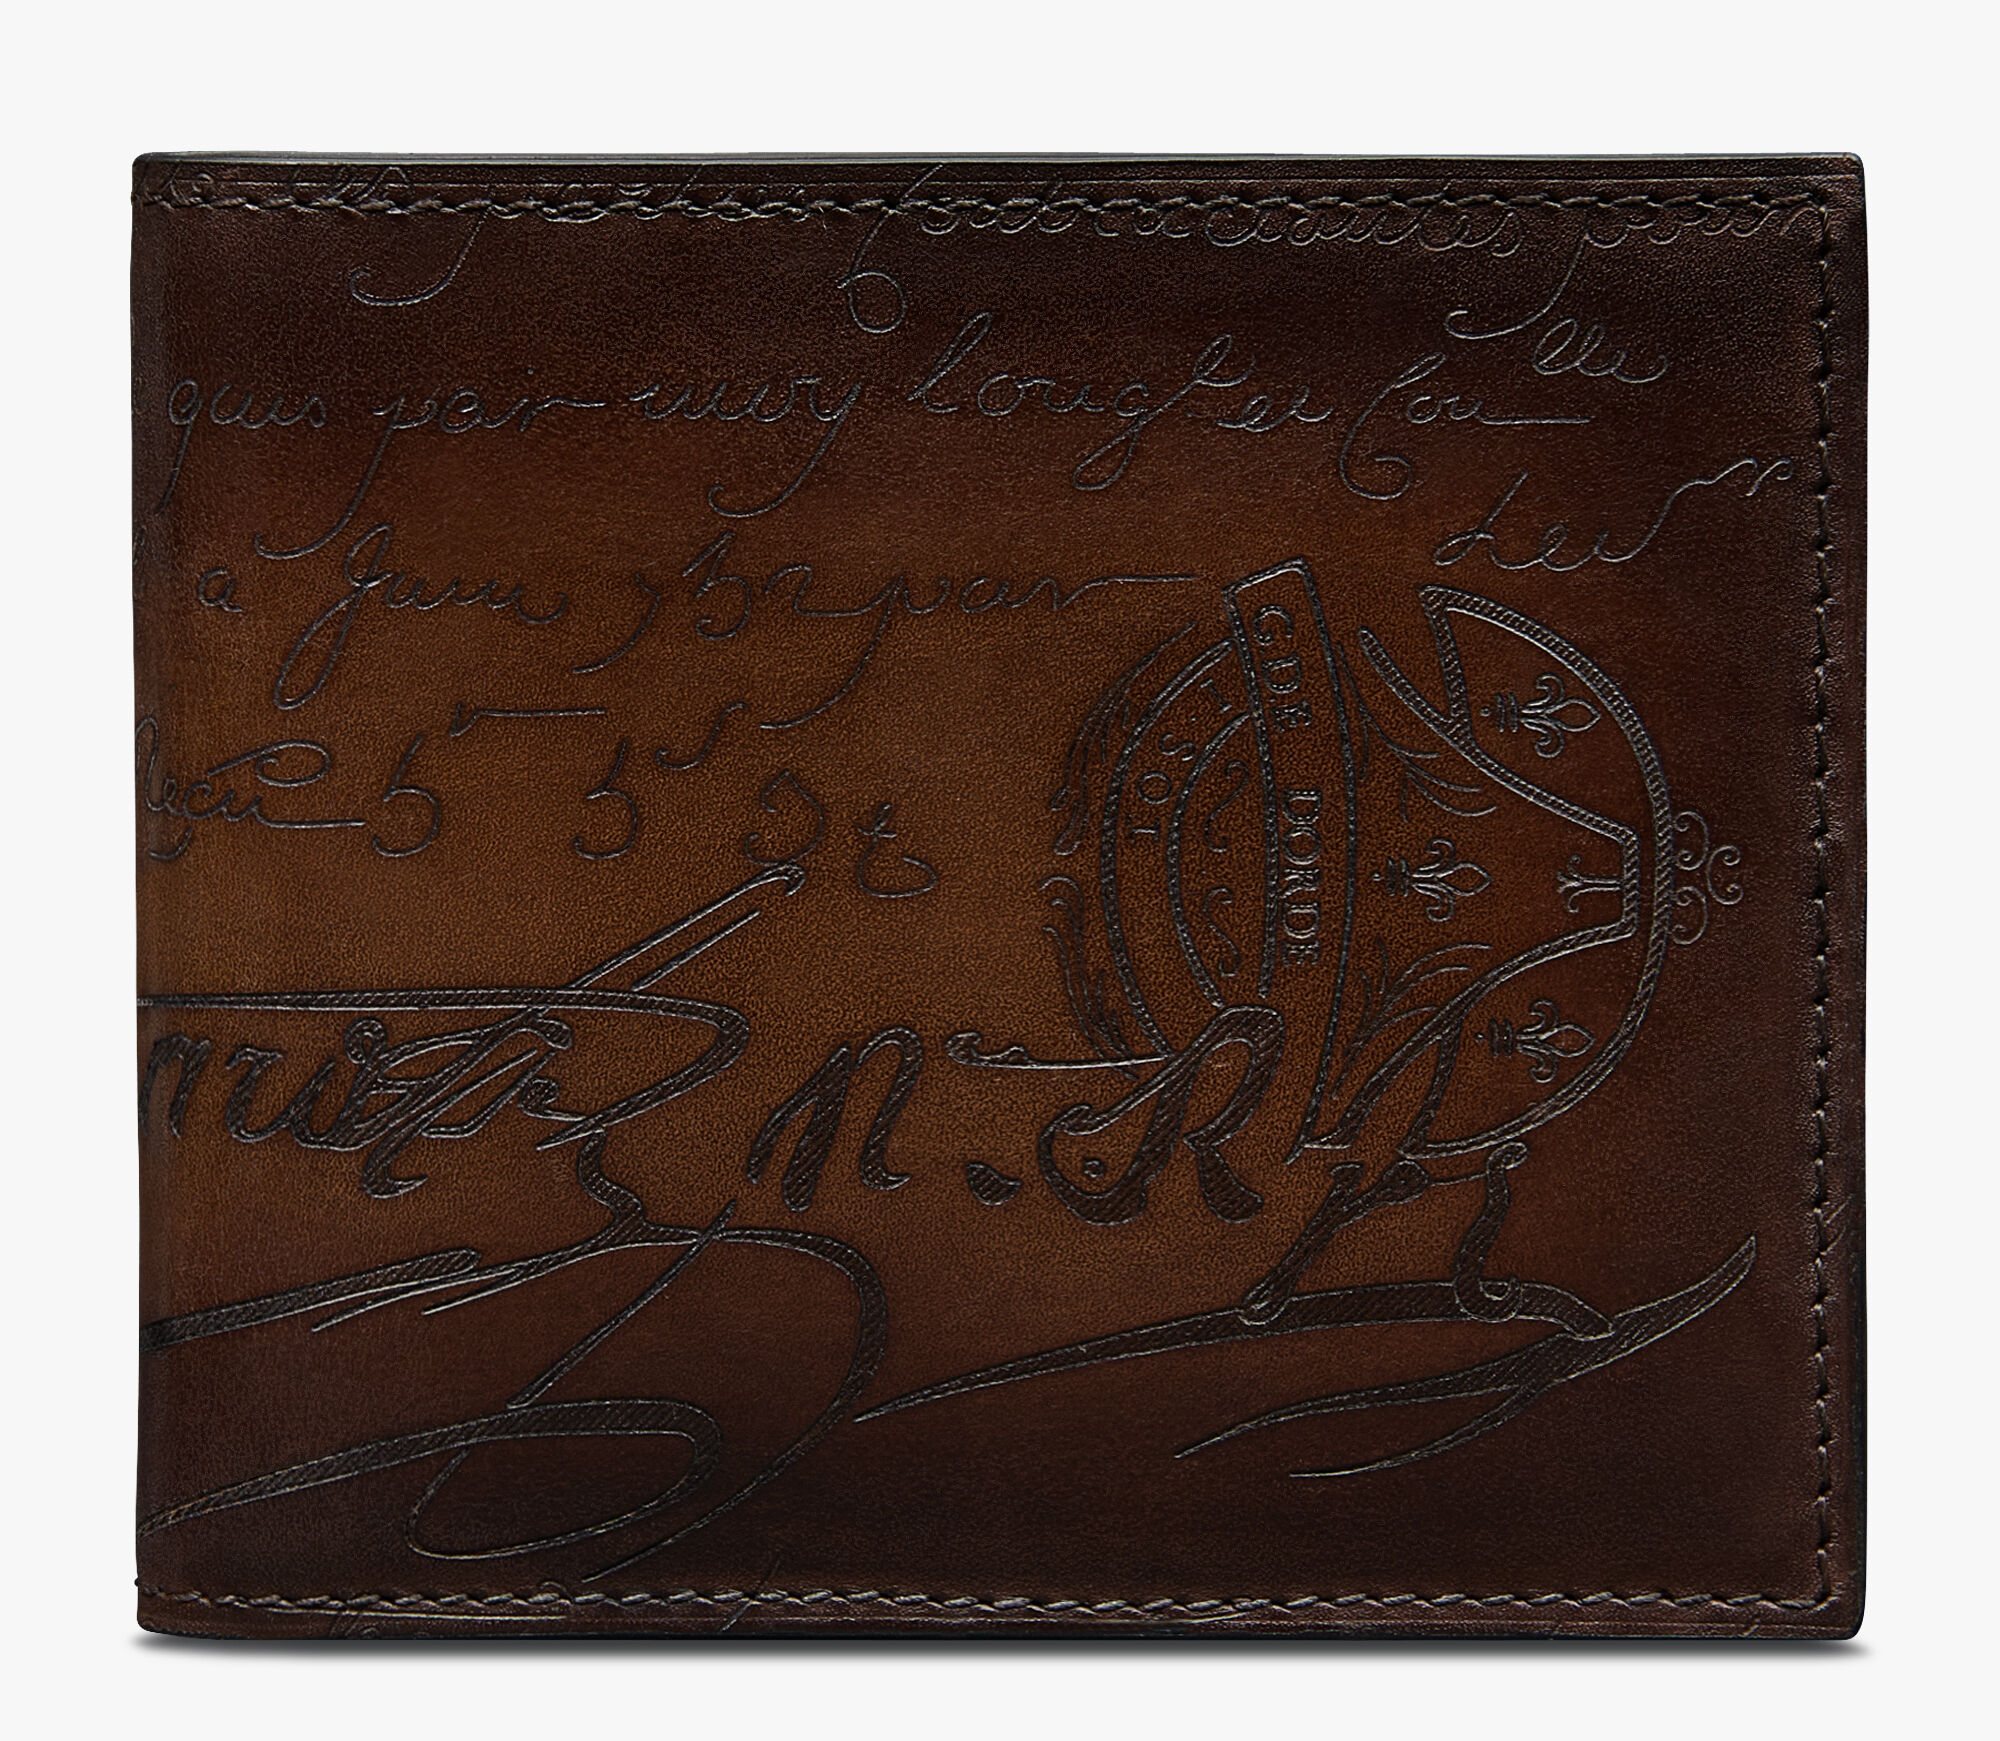 Wallet collections by Berluti - GB